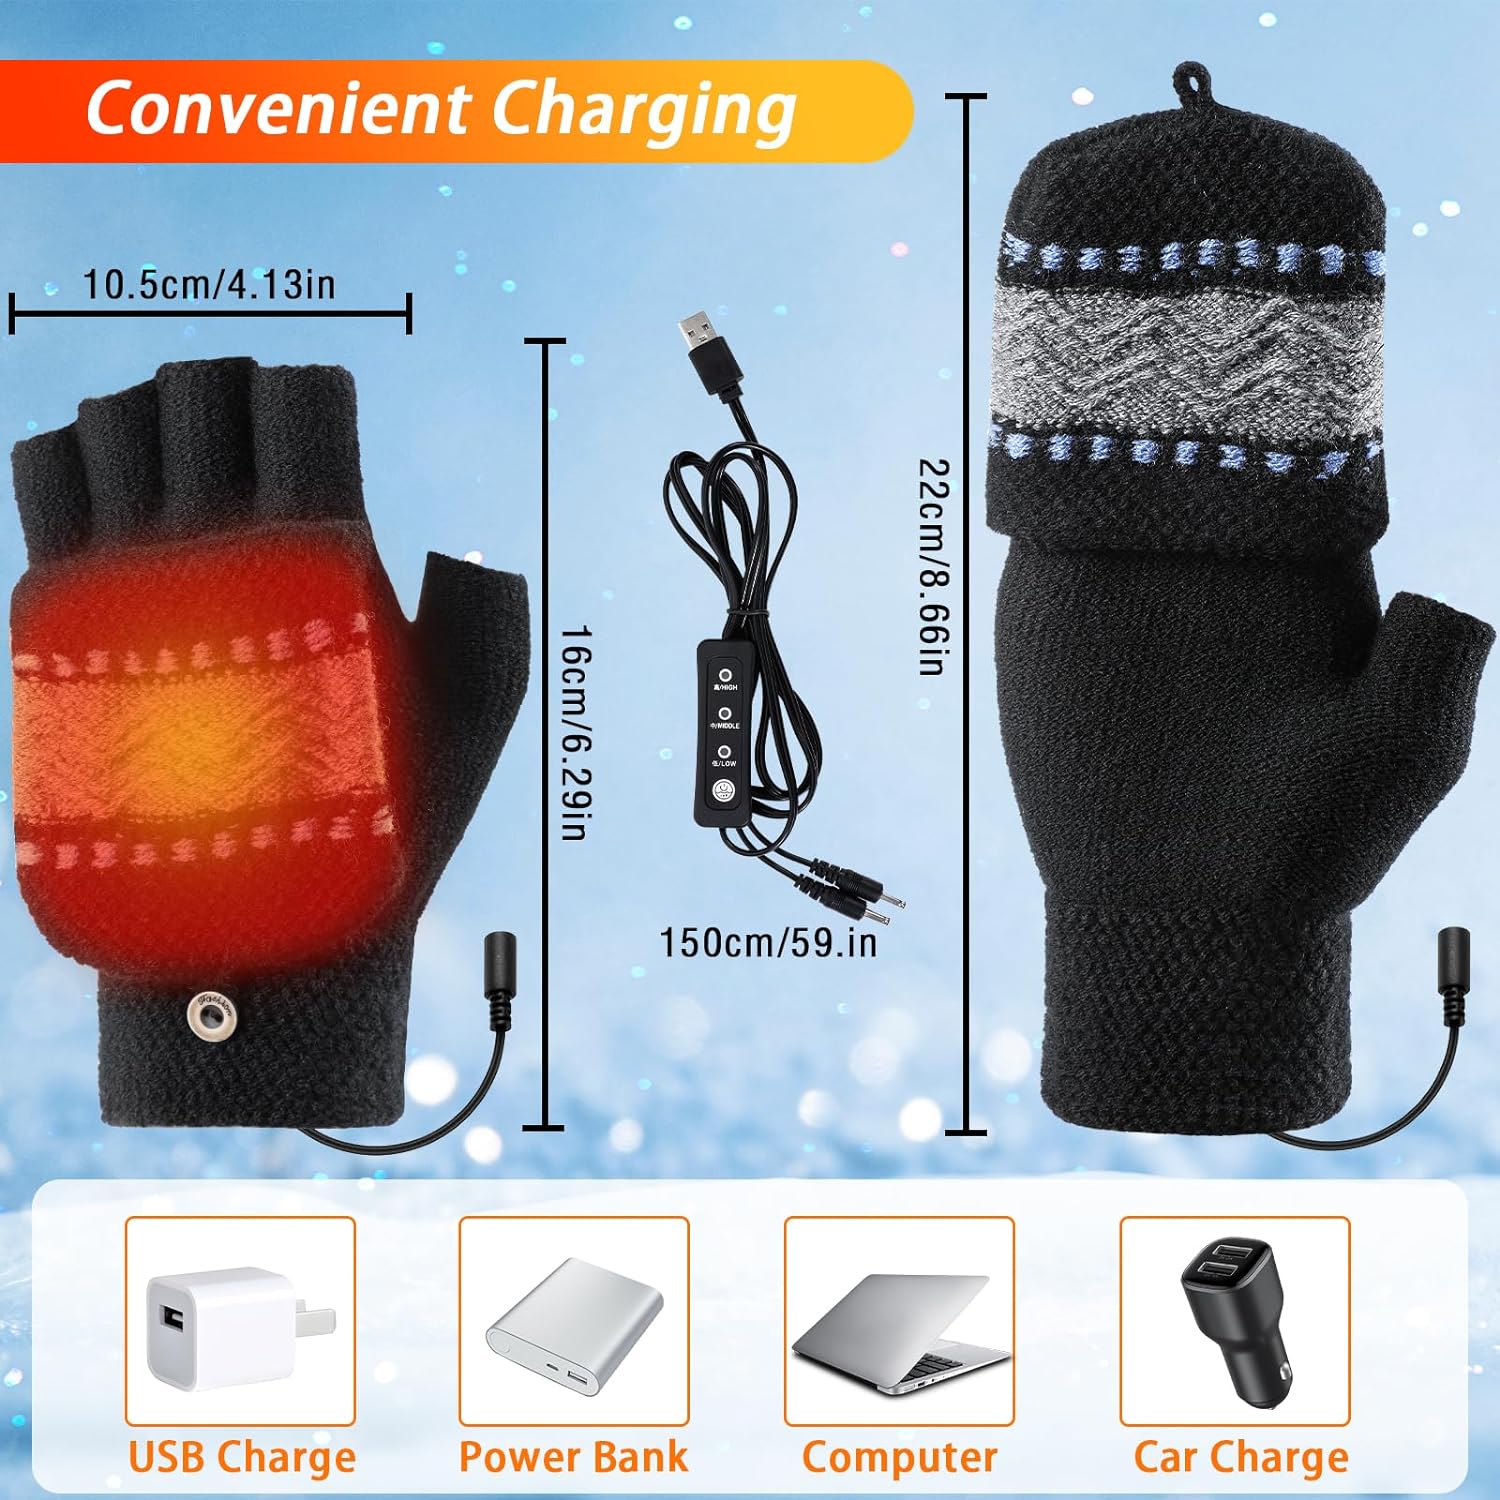 ACETOP USB Heated Gloves for Men and Women, Winter Warm Heating Gloves Electric Fingerless Touchscreen Gloves Full & Half Hands Warmer with 3 Adjustable Temperature, Washable Knitting Laptop Gloves